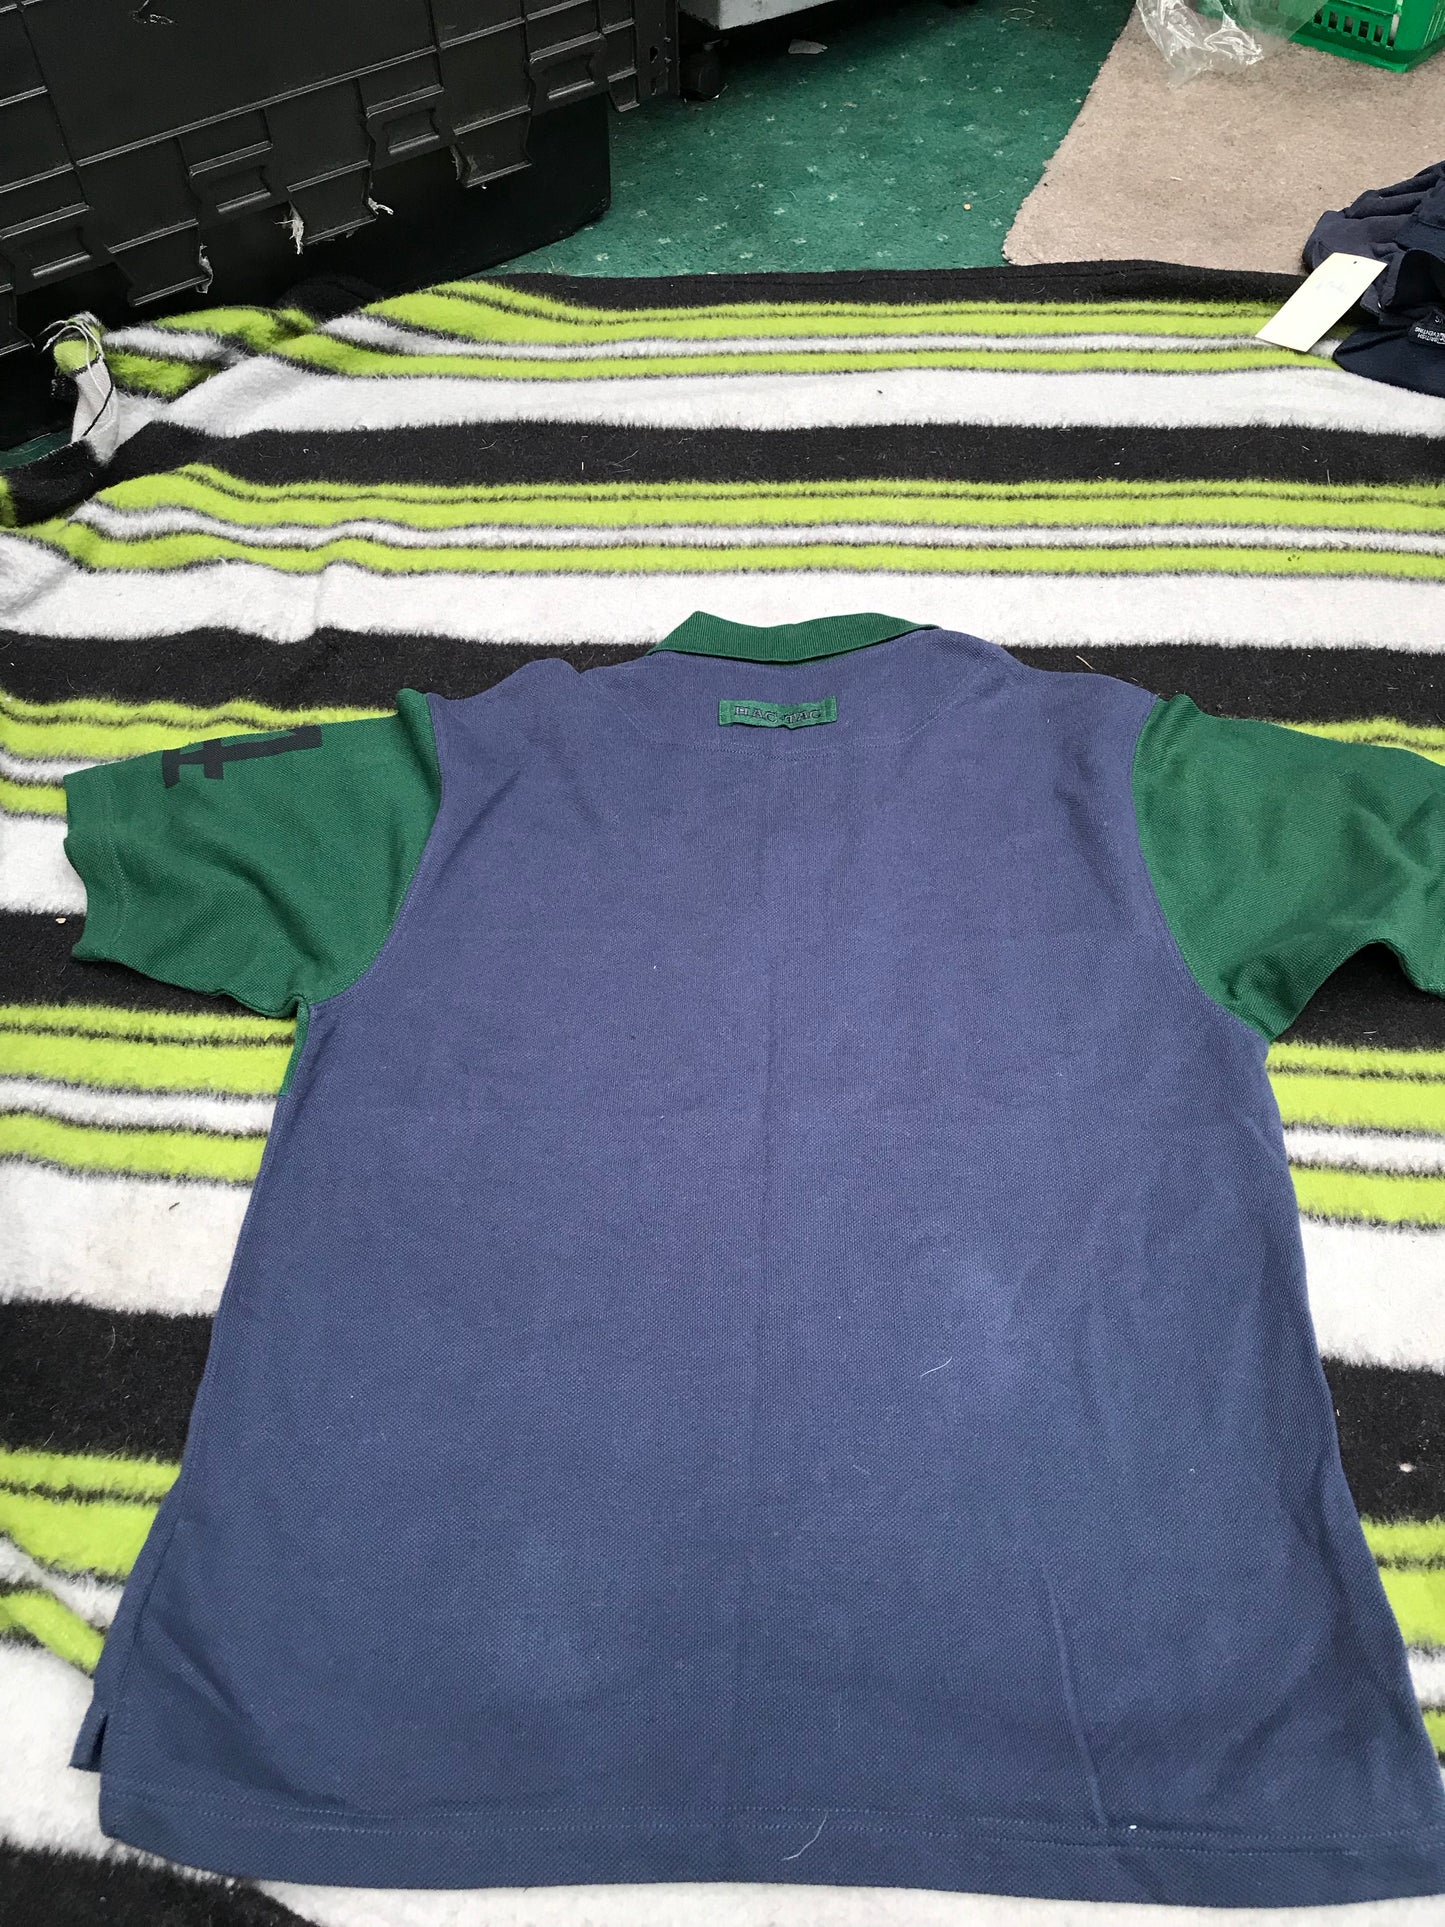 Hav-Tac polo t-shirt green and navy blue size M (12) FREE POSTAGE